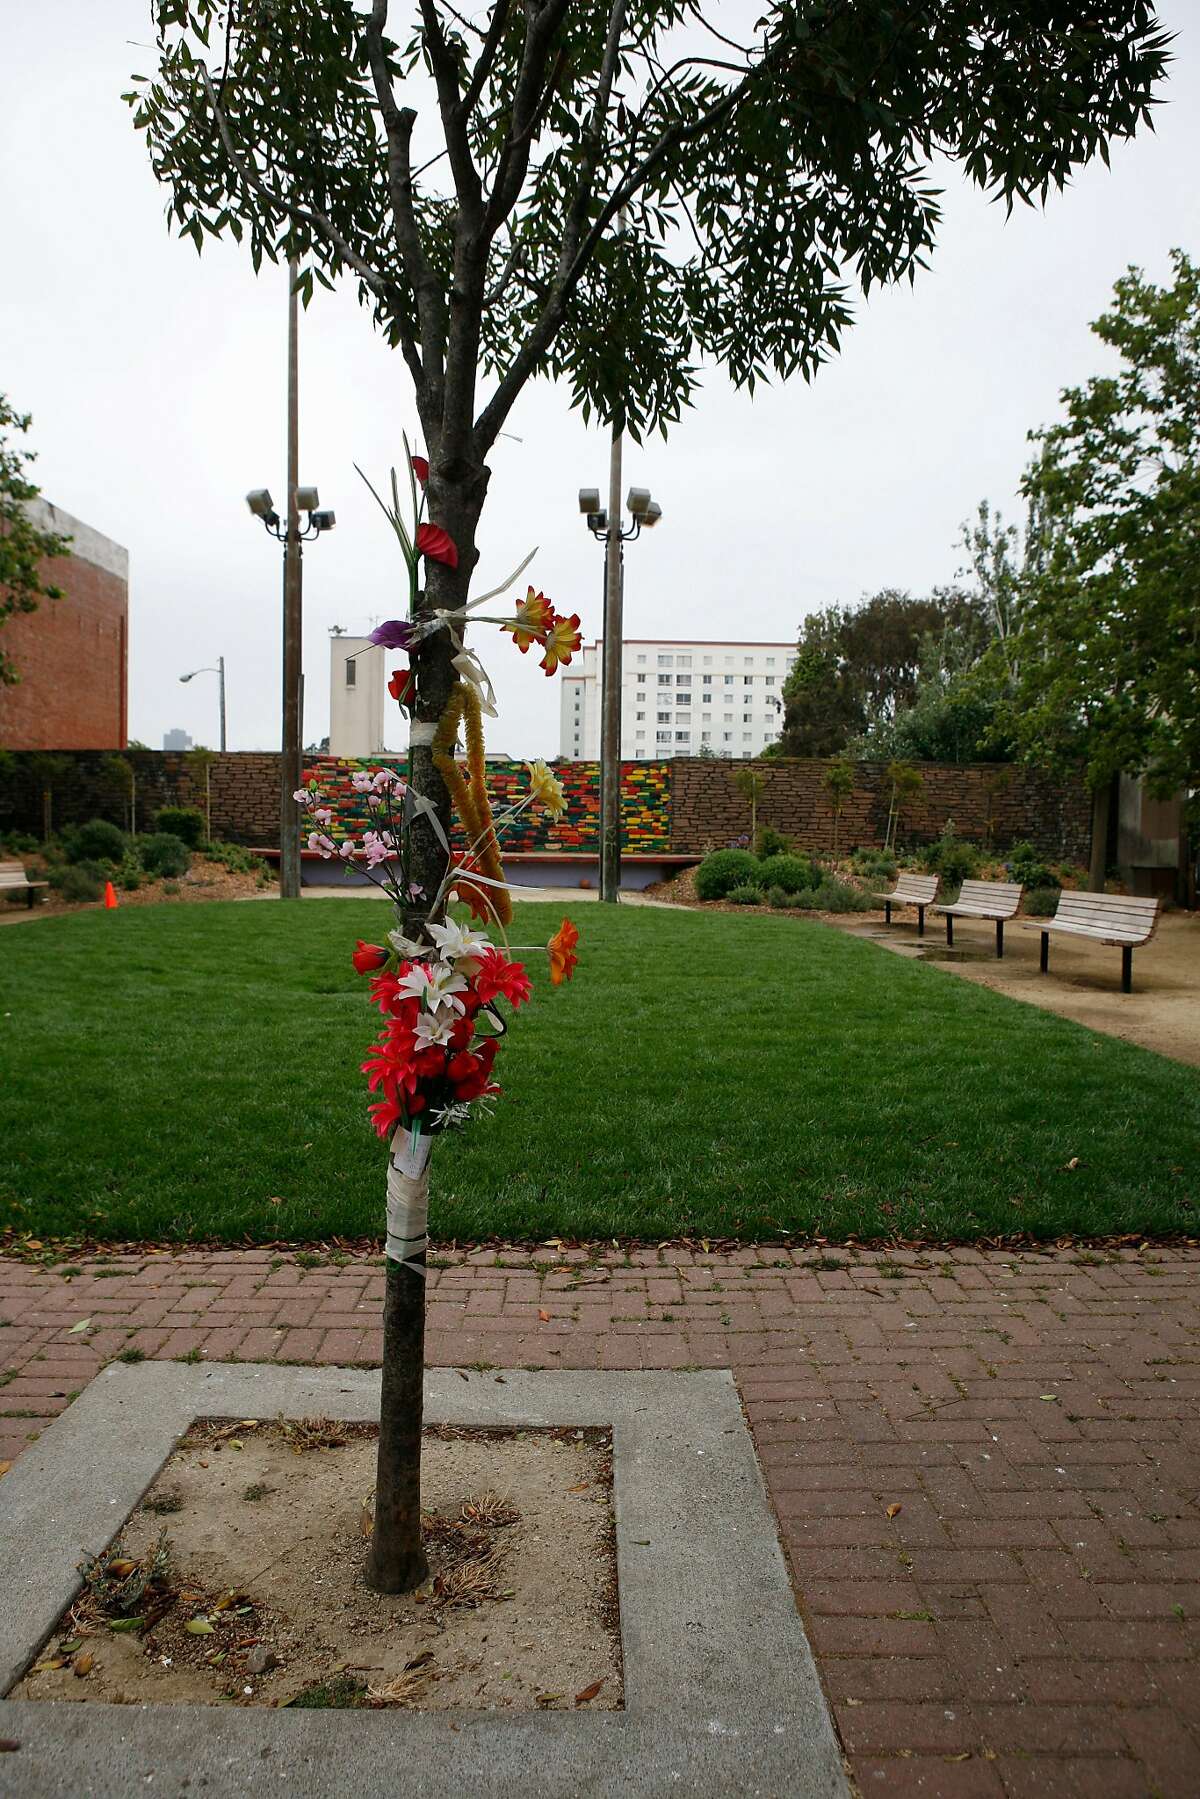 Memorial flowers at the Fillmore-Turk mini park in San Francisco in 2008. Under the current plan for park renovations, there will be a memorial wall for the Jonestown victims in the park.